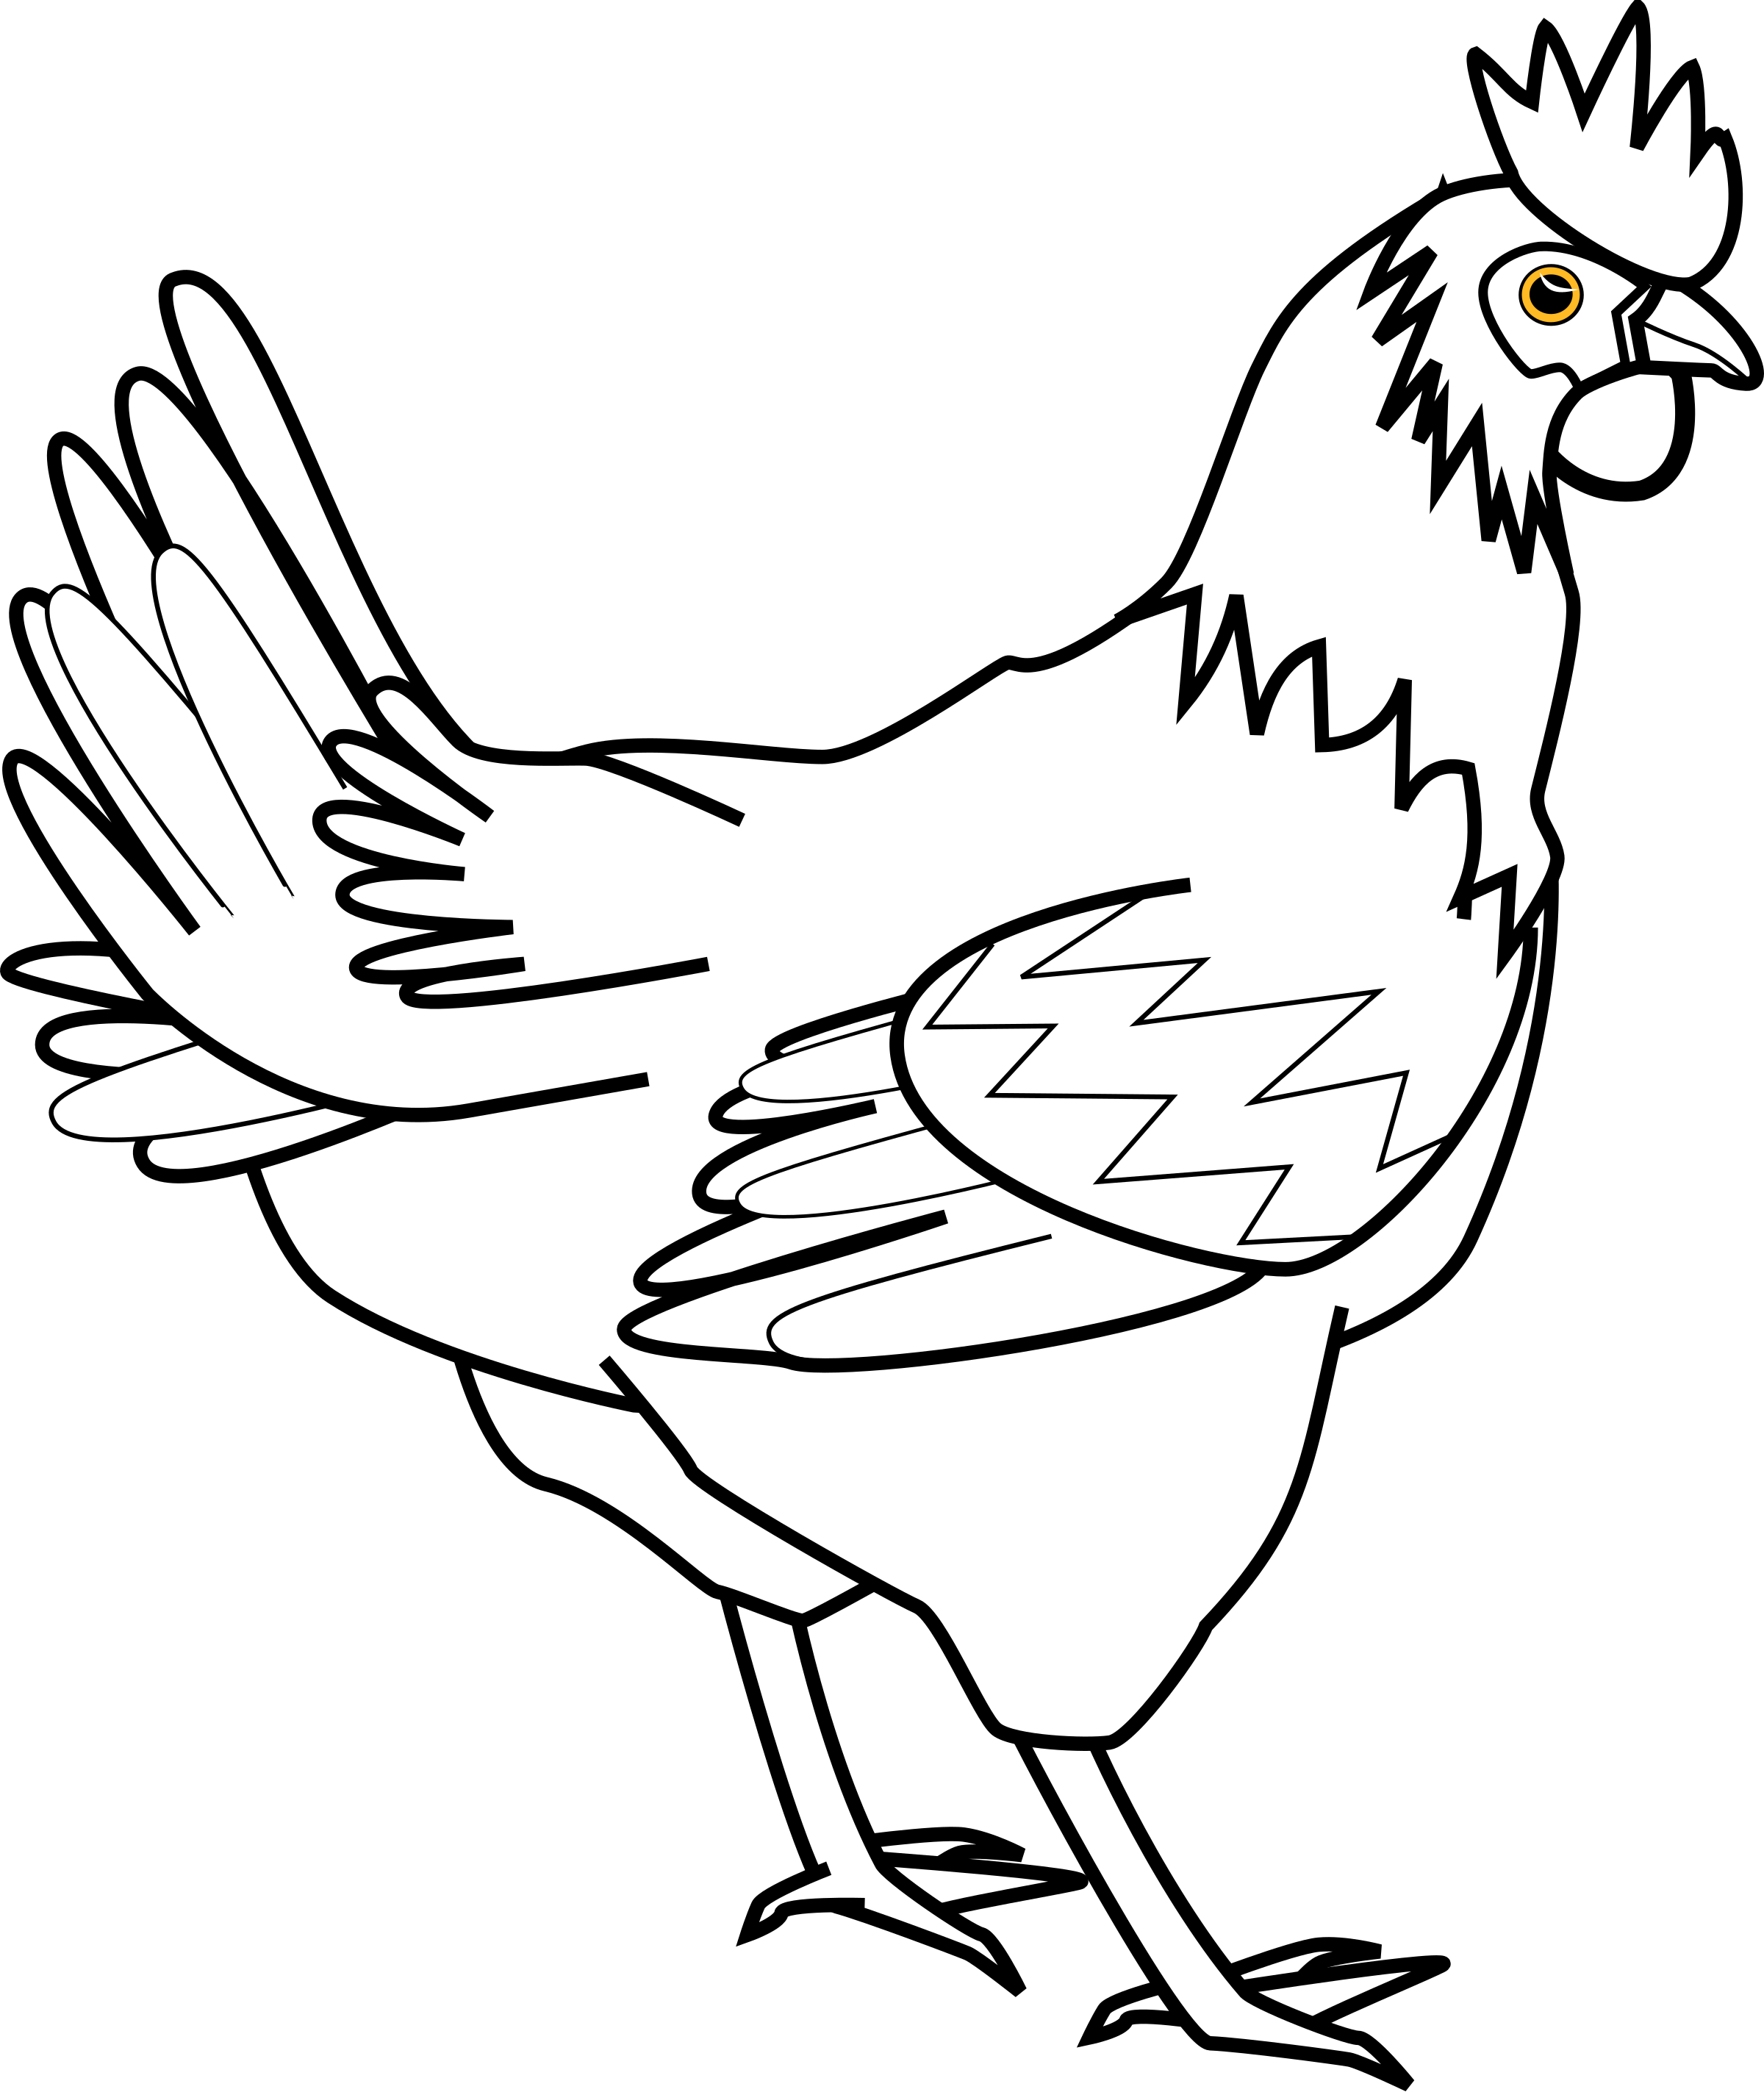 Line art davidone by. Clipart chicken coloring page